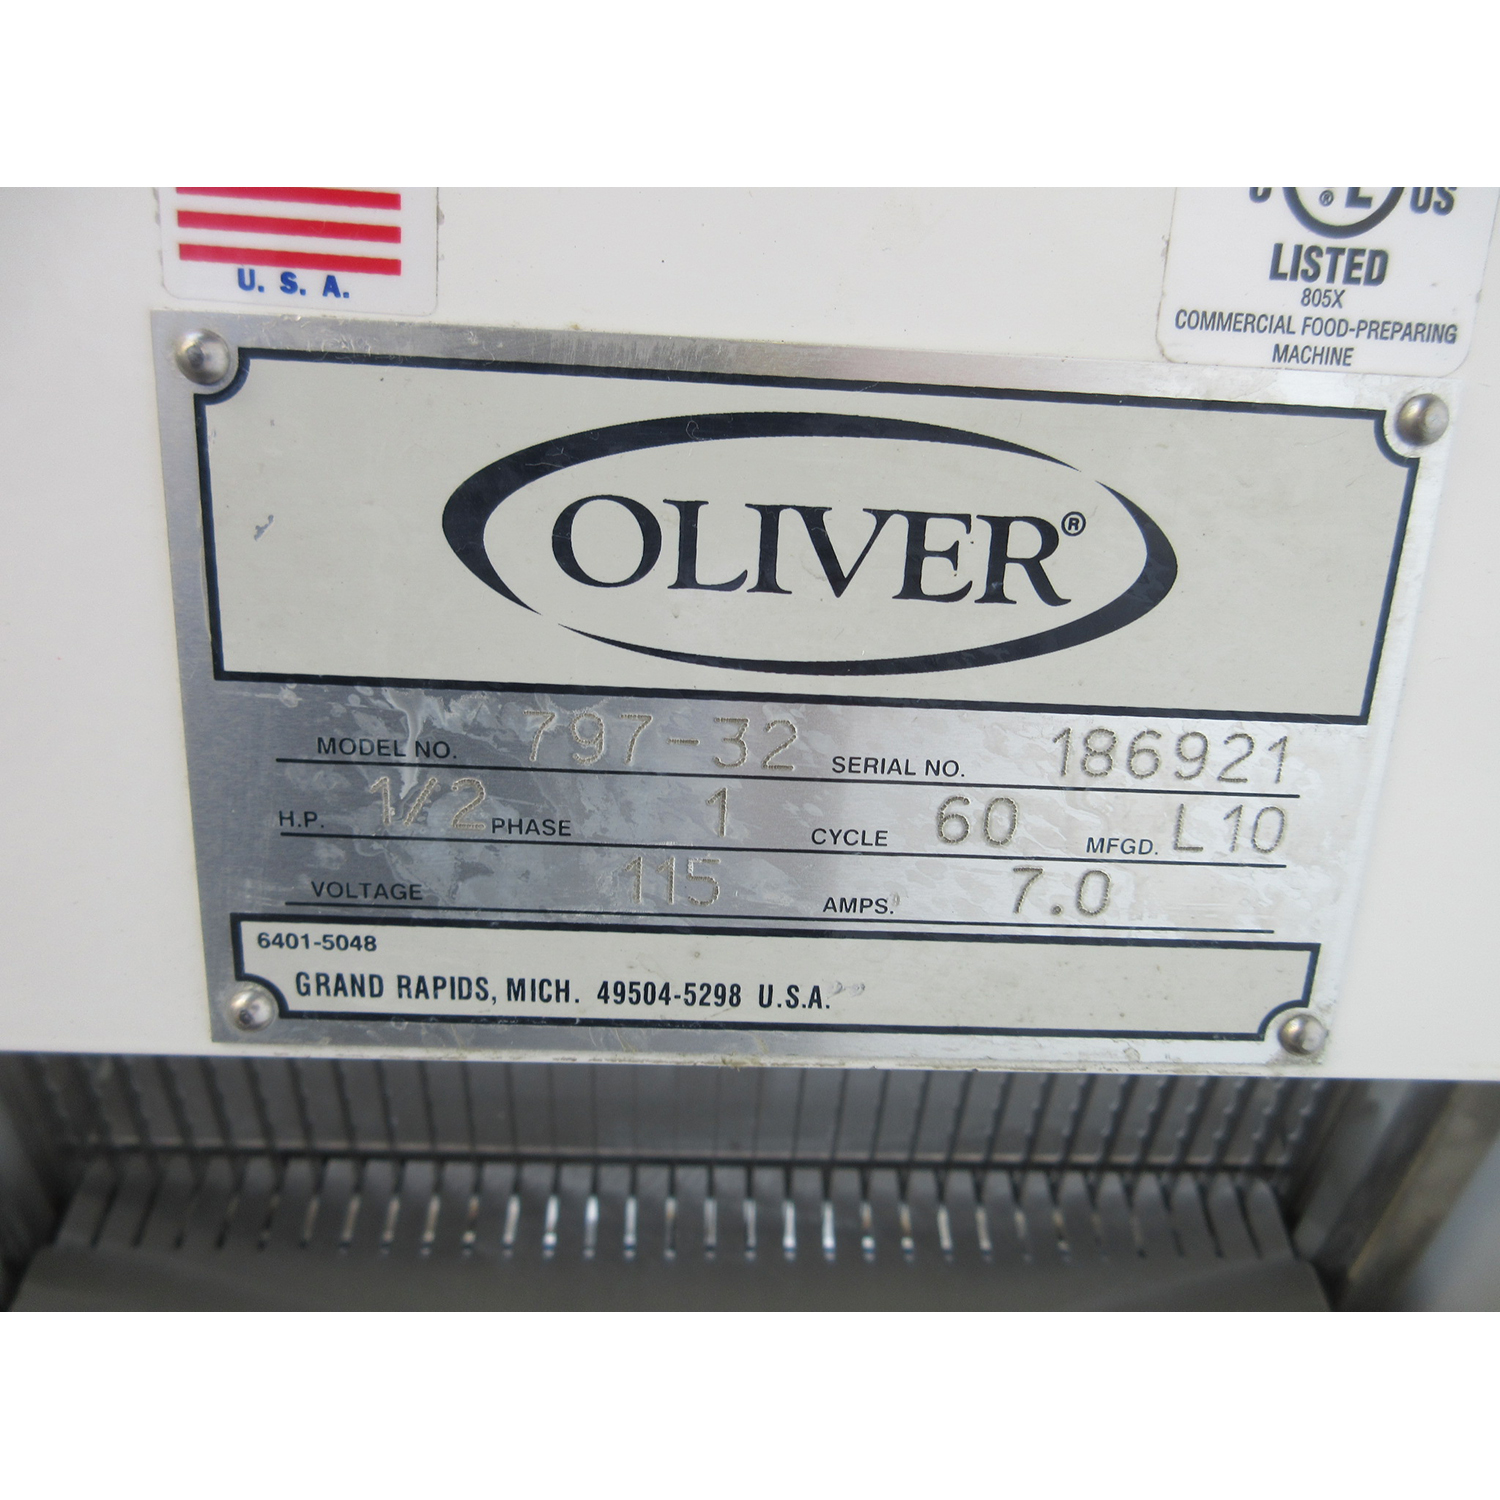 Oliver 797-32 Bread Slicer 1/2" Cut, Used Excellent Condition image 4